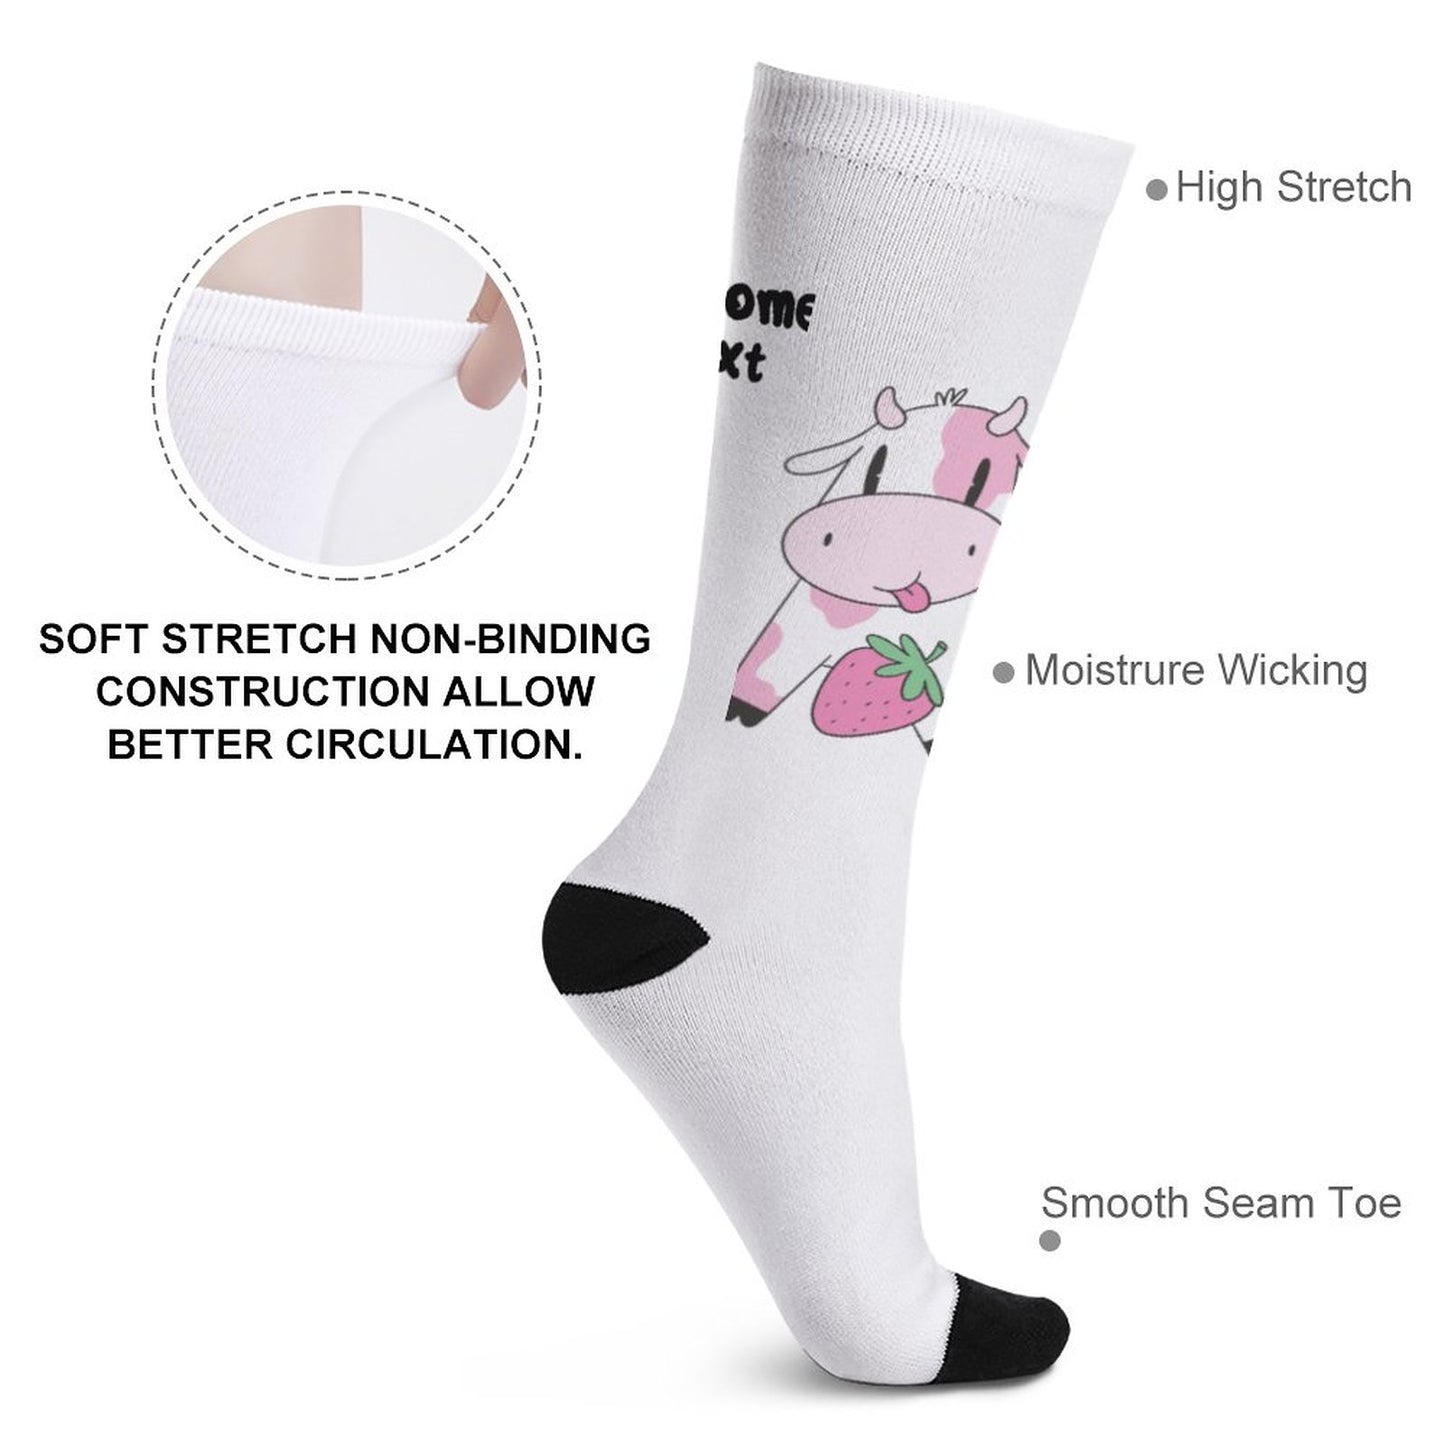 Personalized Your Own Socks